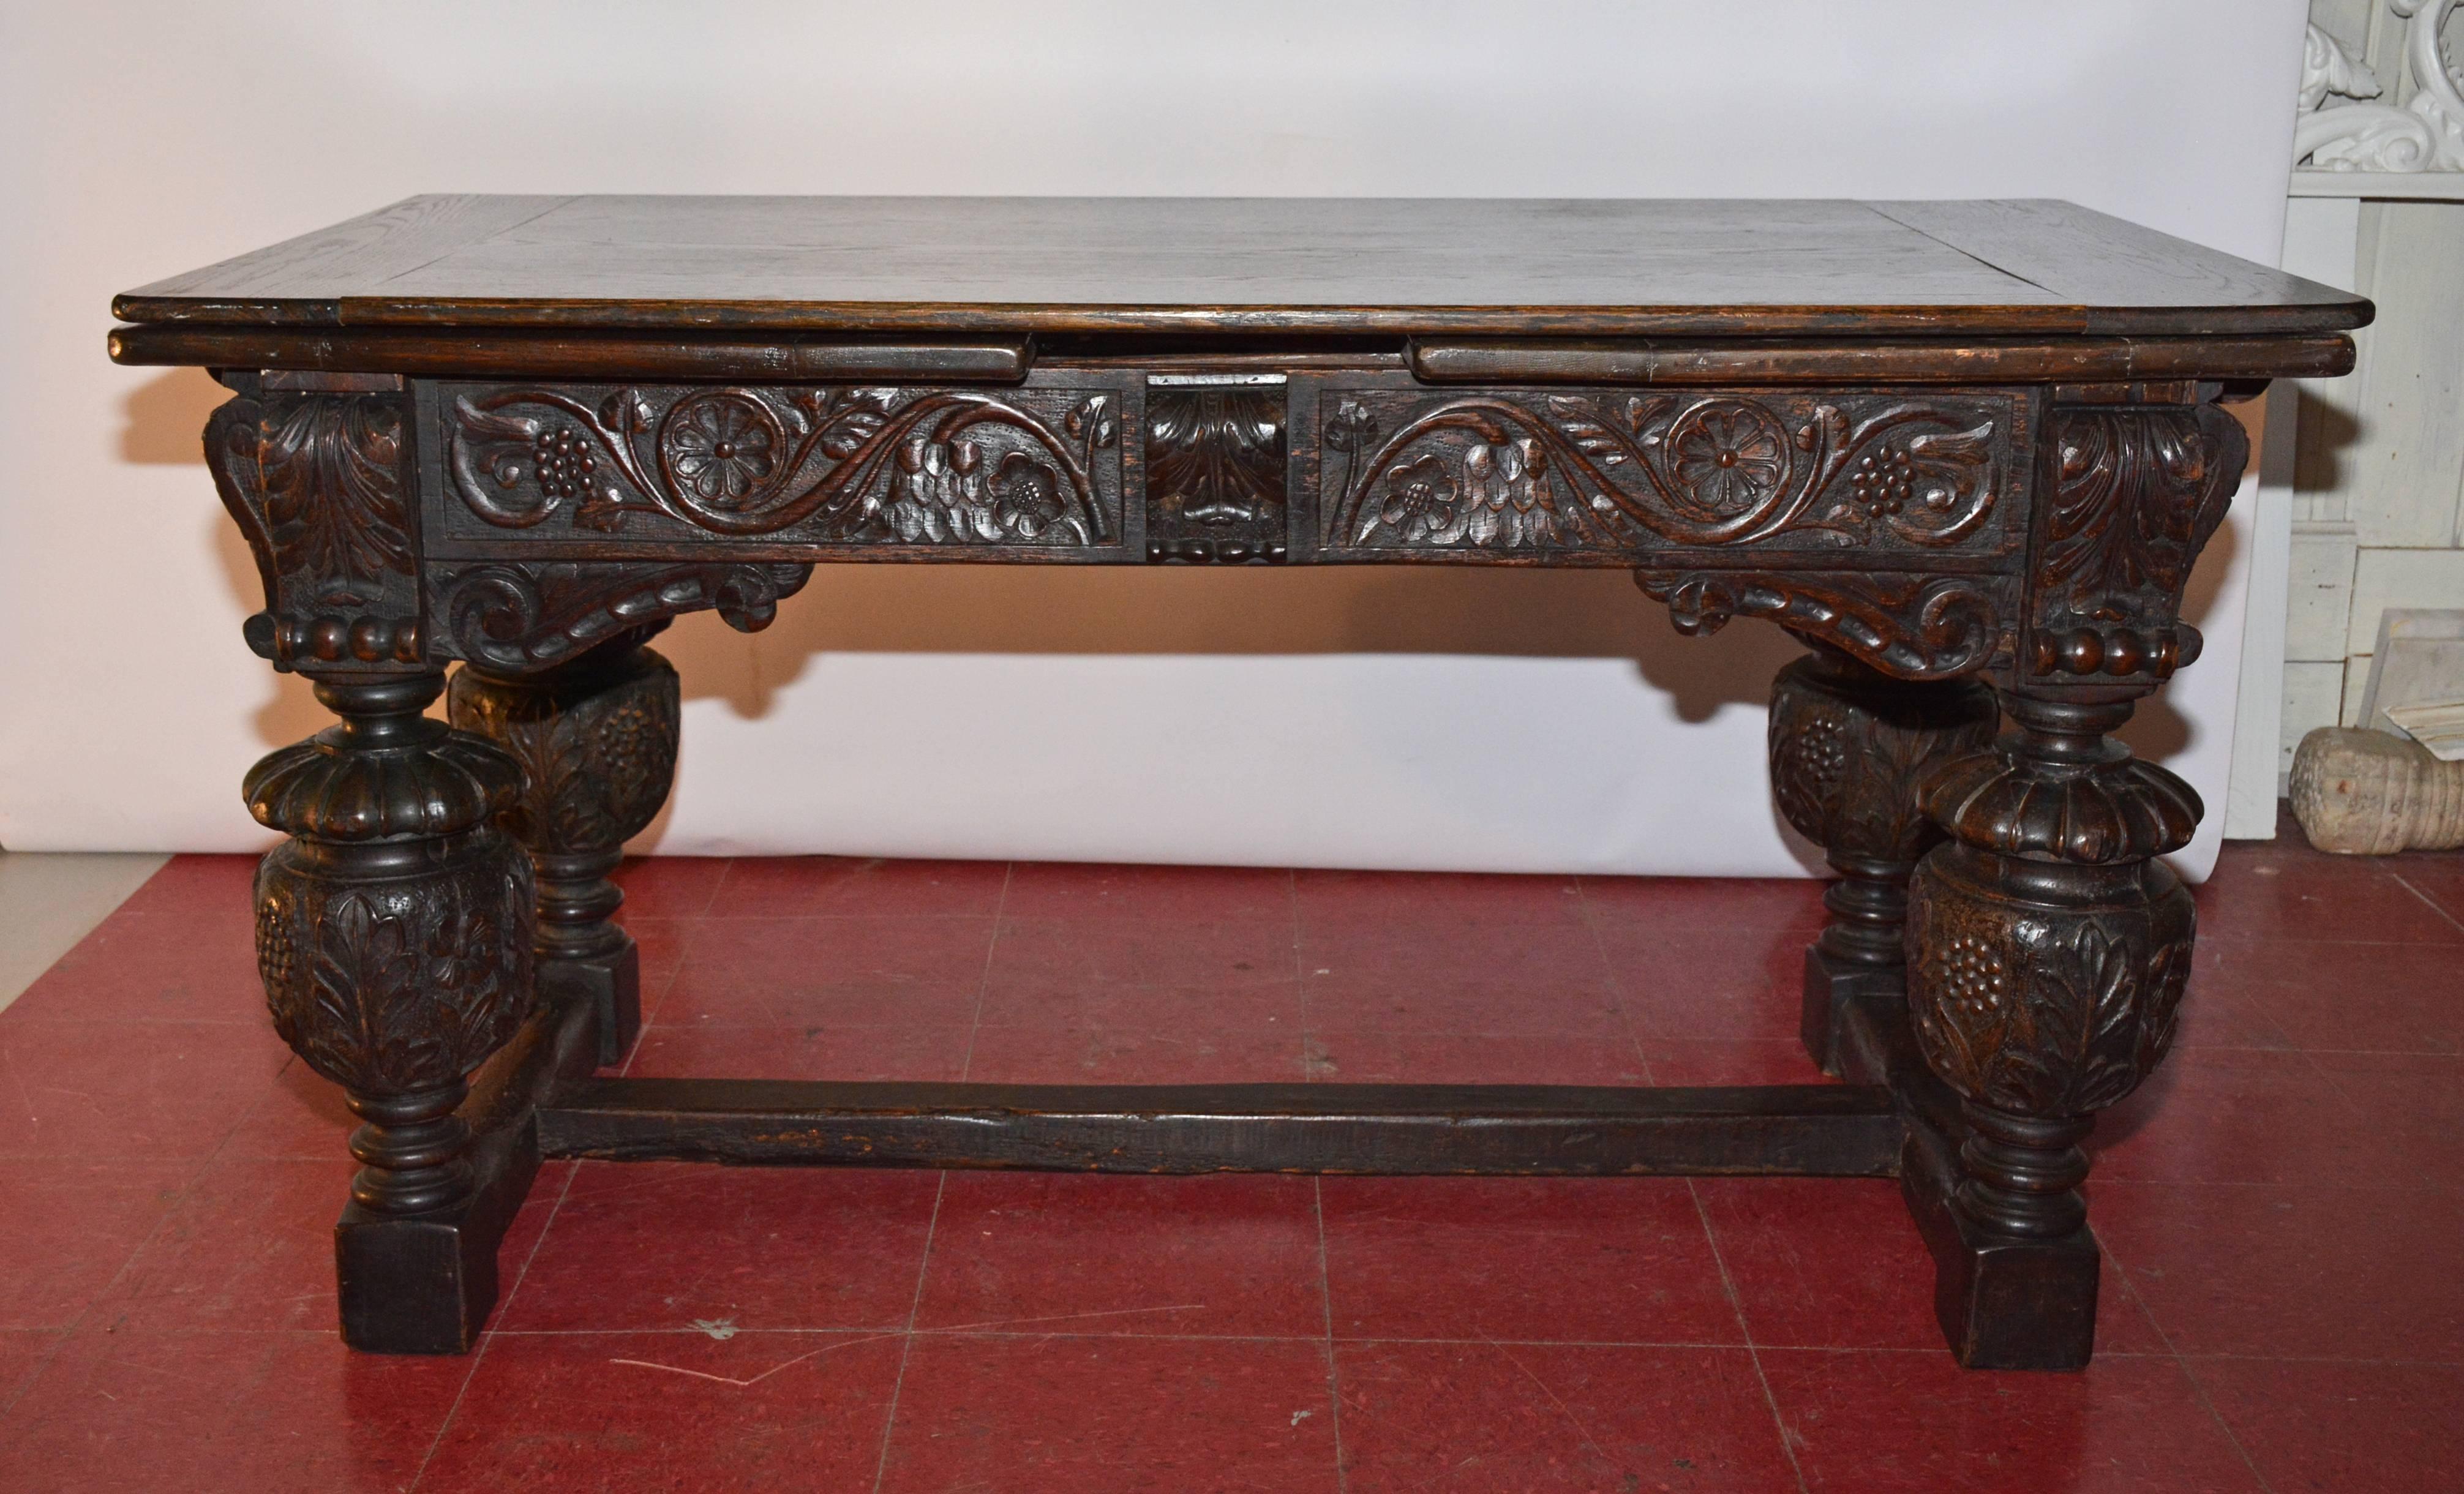 The Elizabethan/ Jacobean style dining table has beautifully hand-carved decorations of grapes, flowers, leaves and rosettes and aged patina.  The table extends to double its closed size which is 57